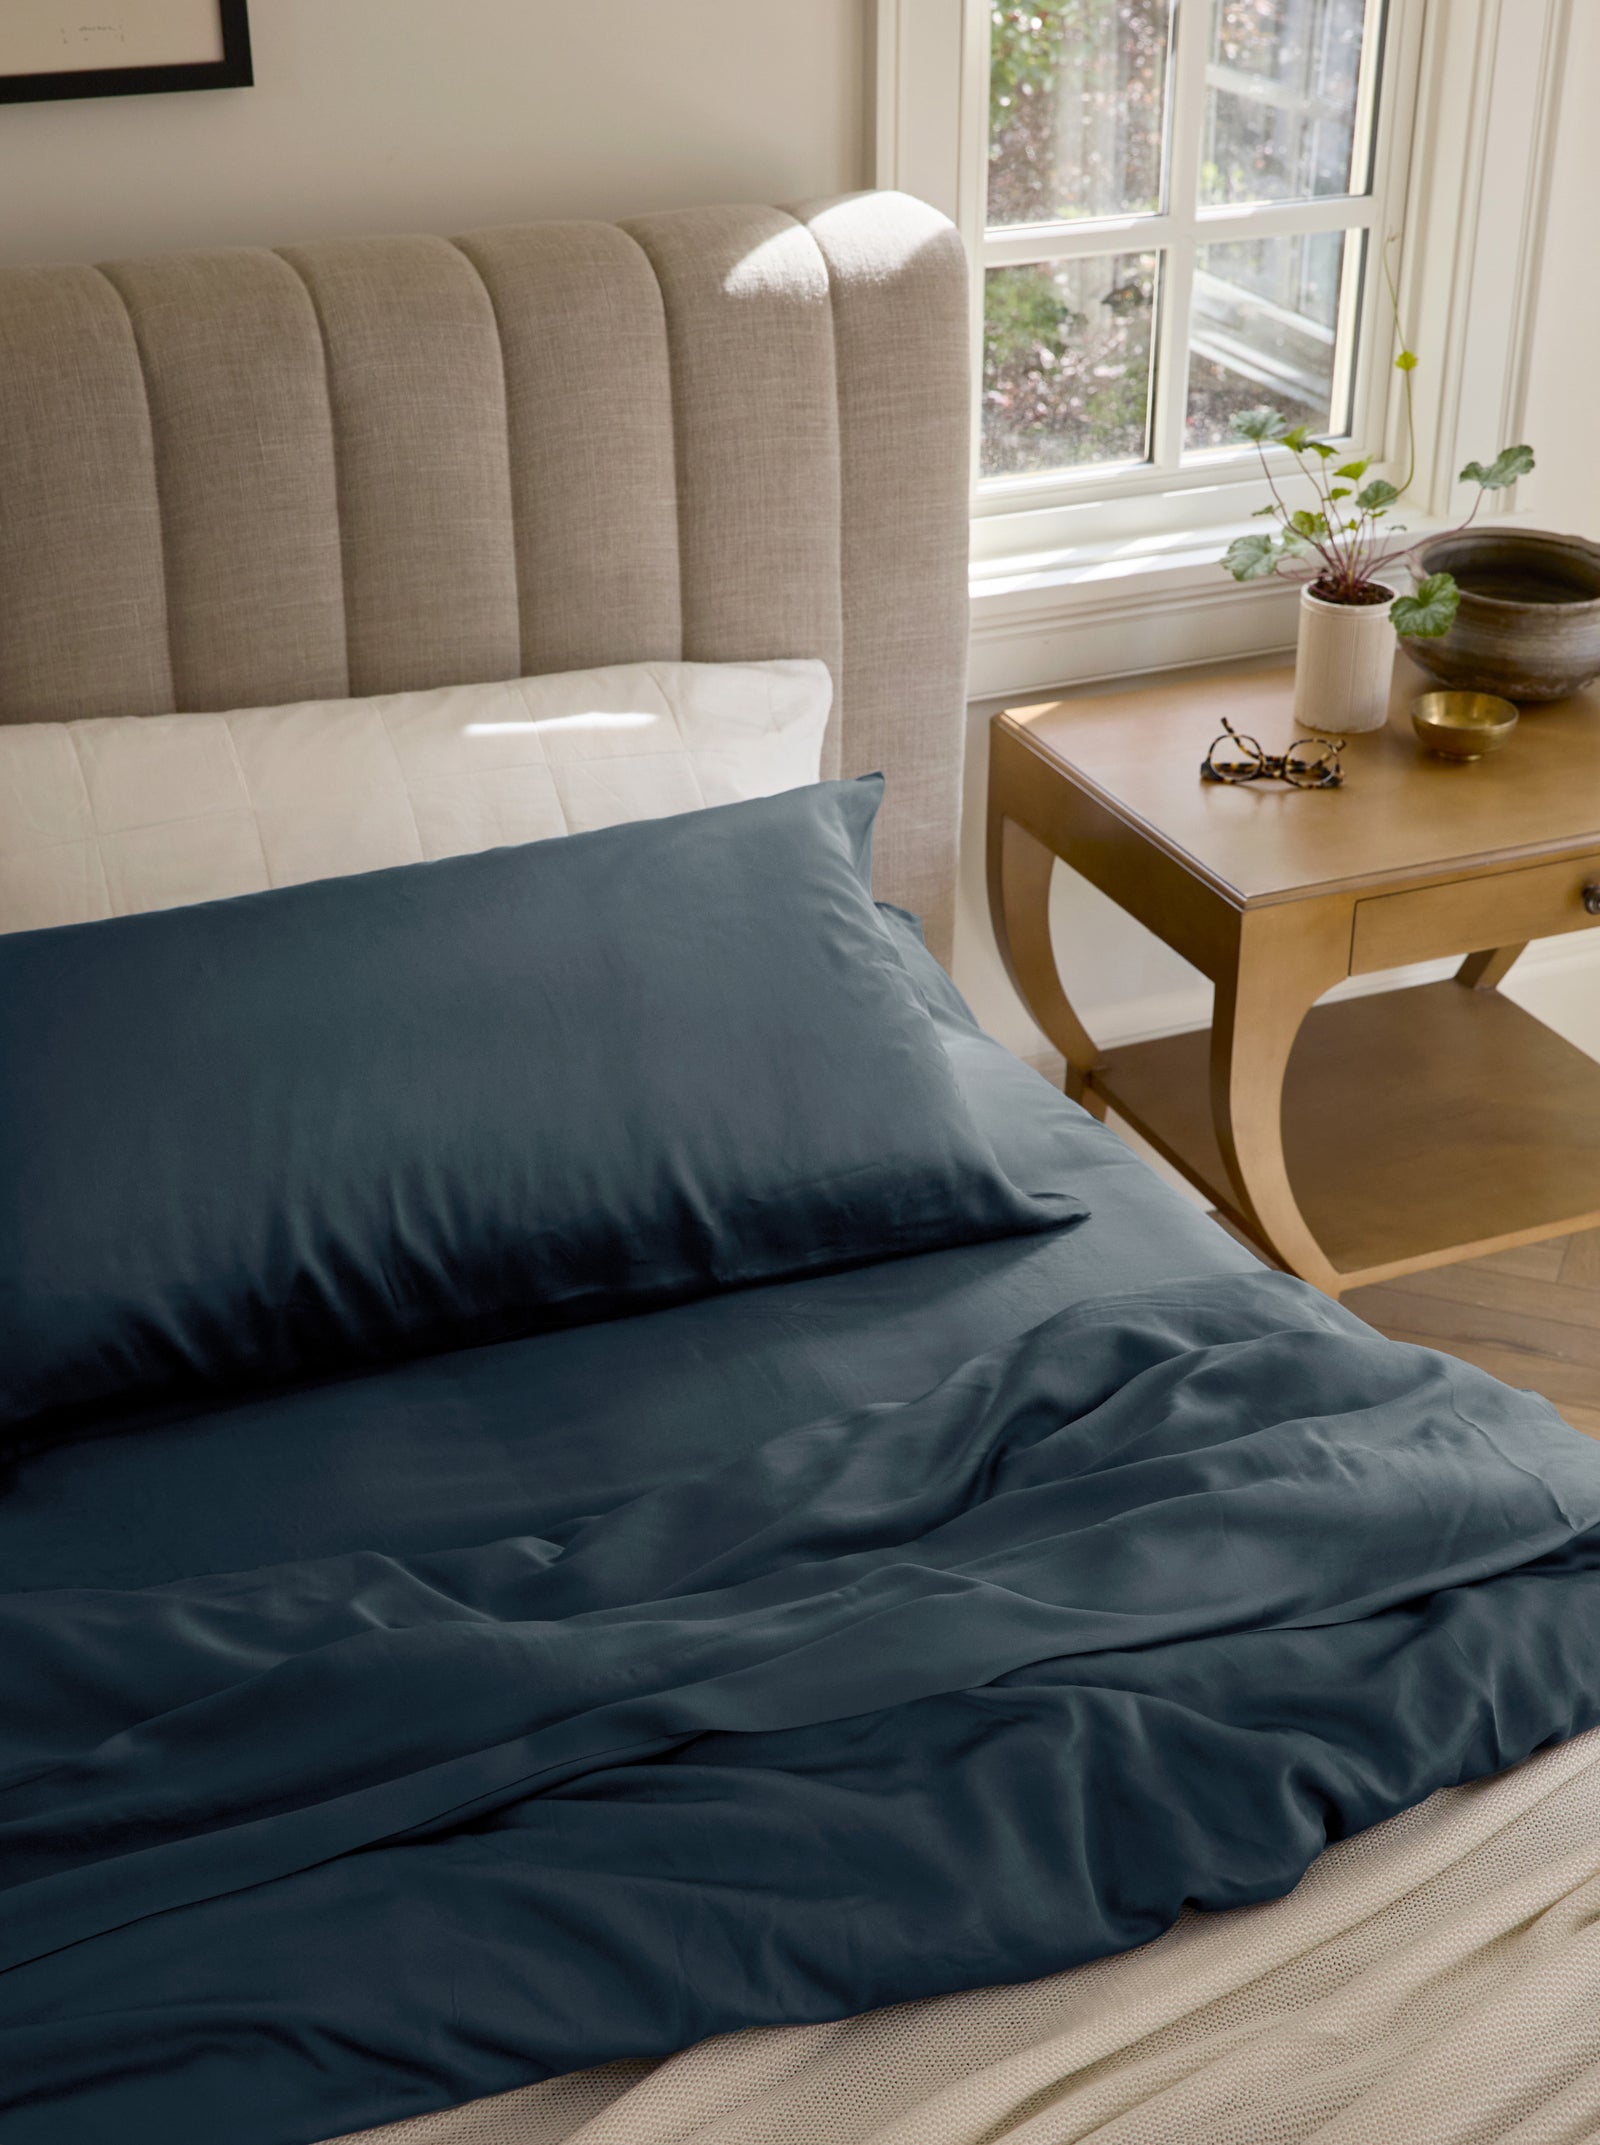 Unmade bed with pacific blue bedding 